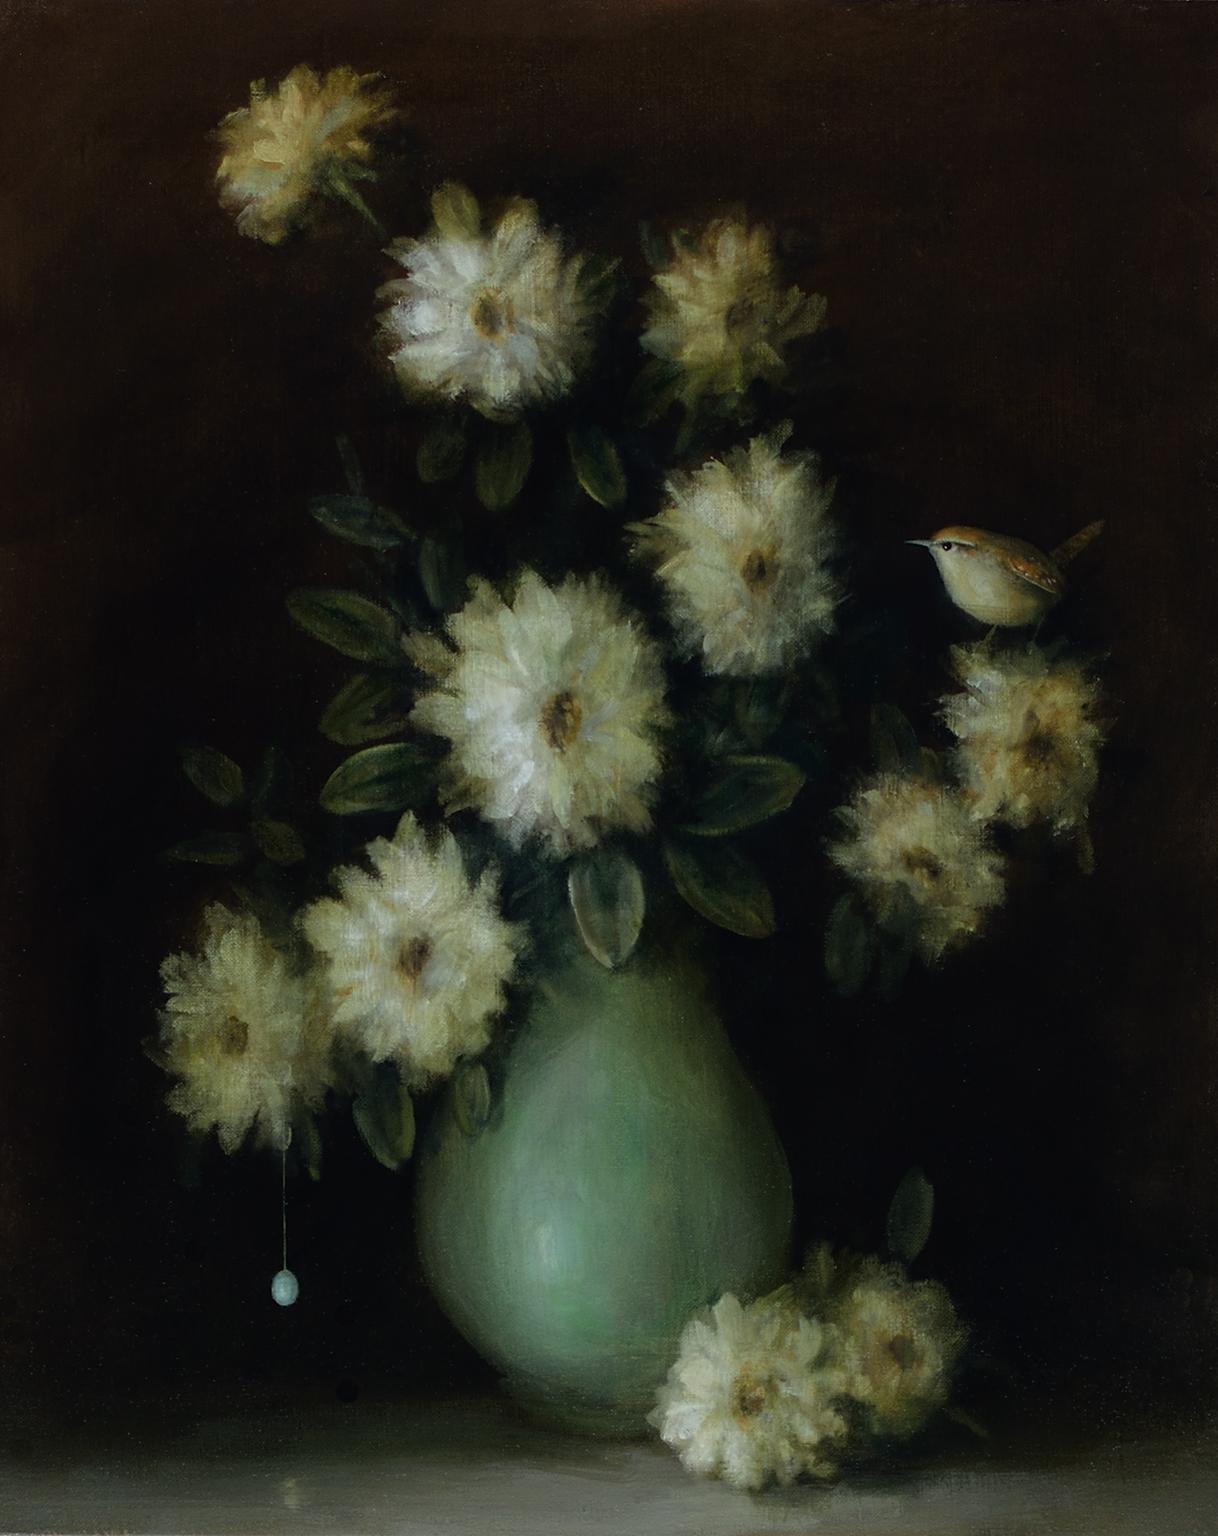 "Floral Still Life (Wren and Vase)" still life oil painting with flowers, bird